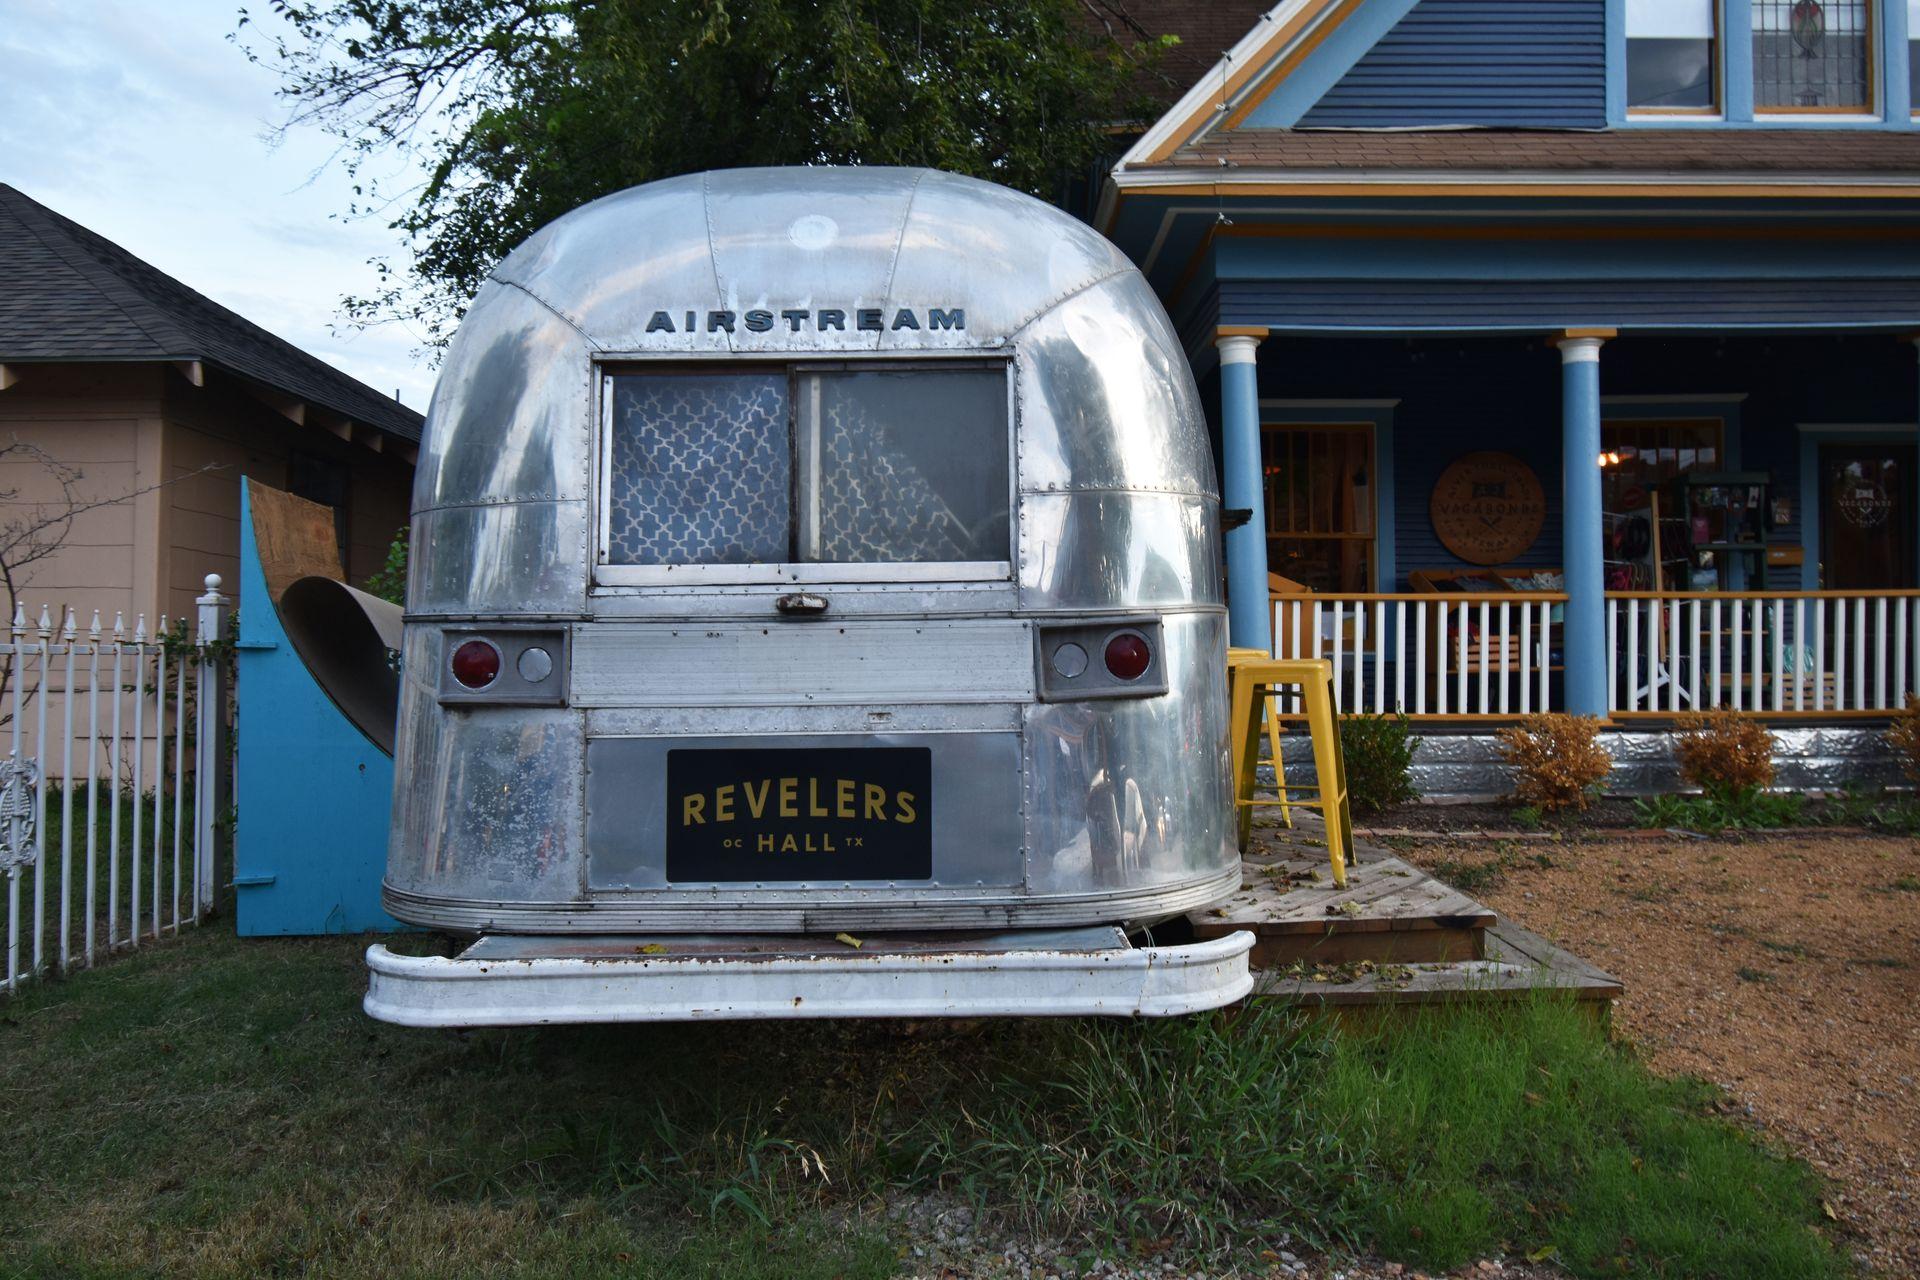 An airstream labeled "Revelers Hall"